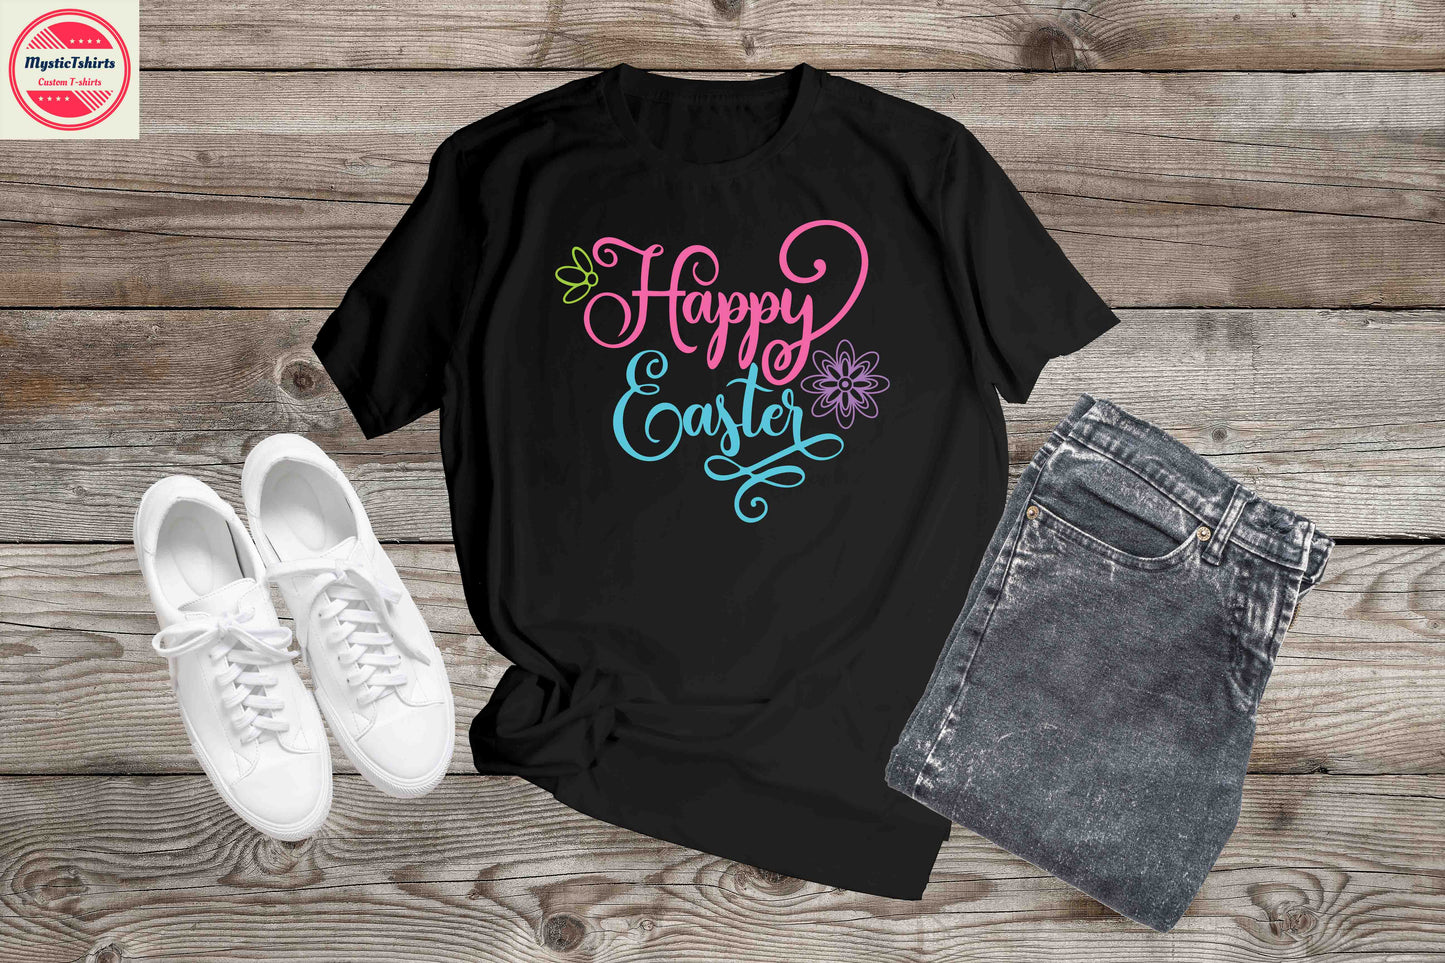 183. Happy Easter, Custom Made Shirt, Personalized T-Shirt, Custom Text, Make Your Own Shirt, Custom Tee